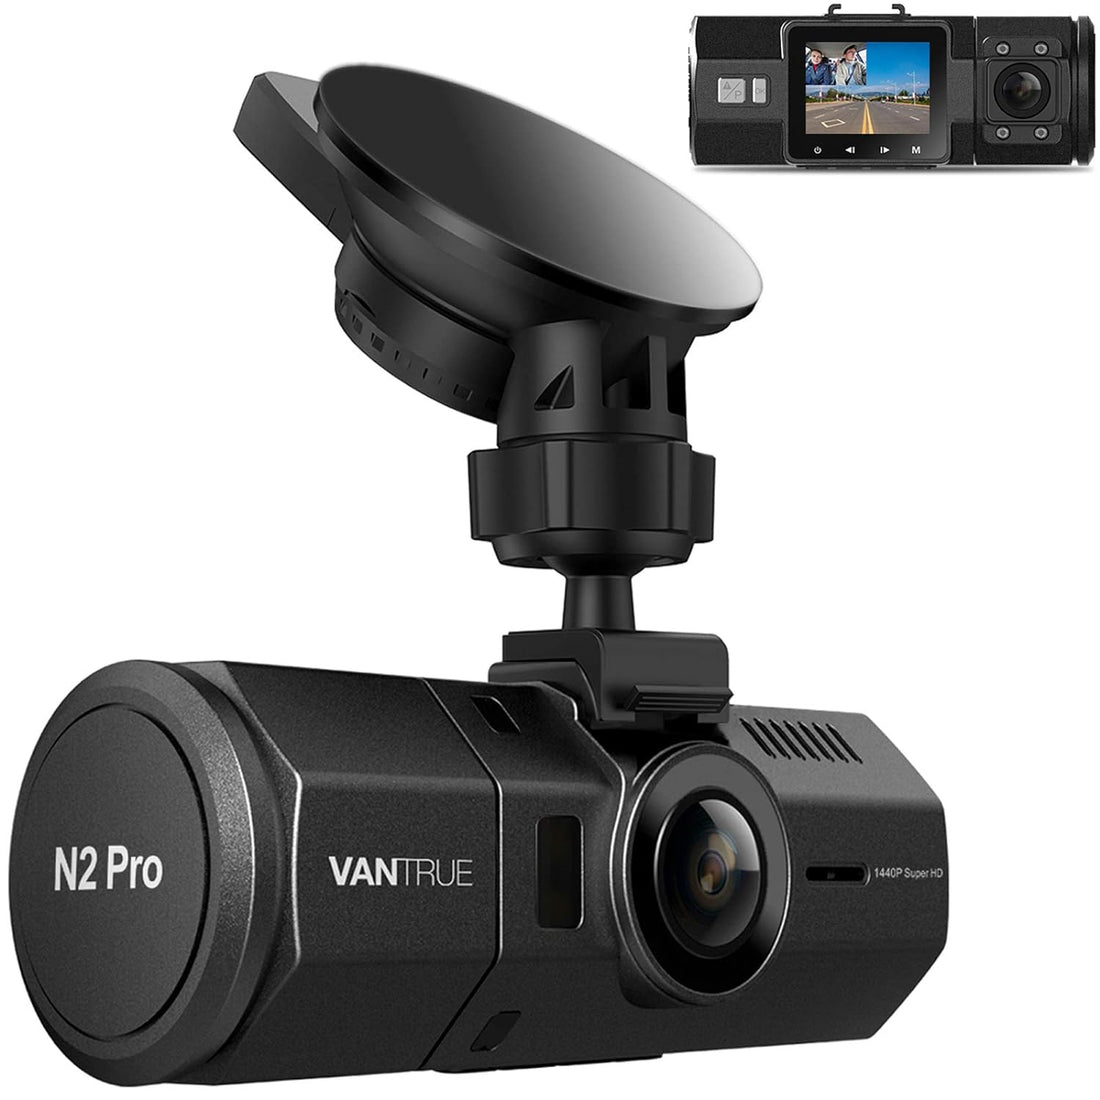 Vantrue N2 Pro Uber Dual Dash Cam Dual 1920x1080P Front and Rear Dash Cam (2.5K 1440P Single Front) 1.5 310° Car Dashboard Camera w/Infrared Night Vision, Sony Sensor, Parking Mode, Motion Detection